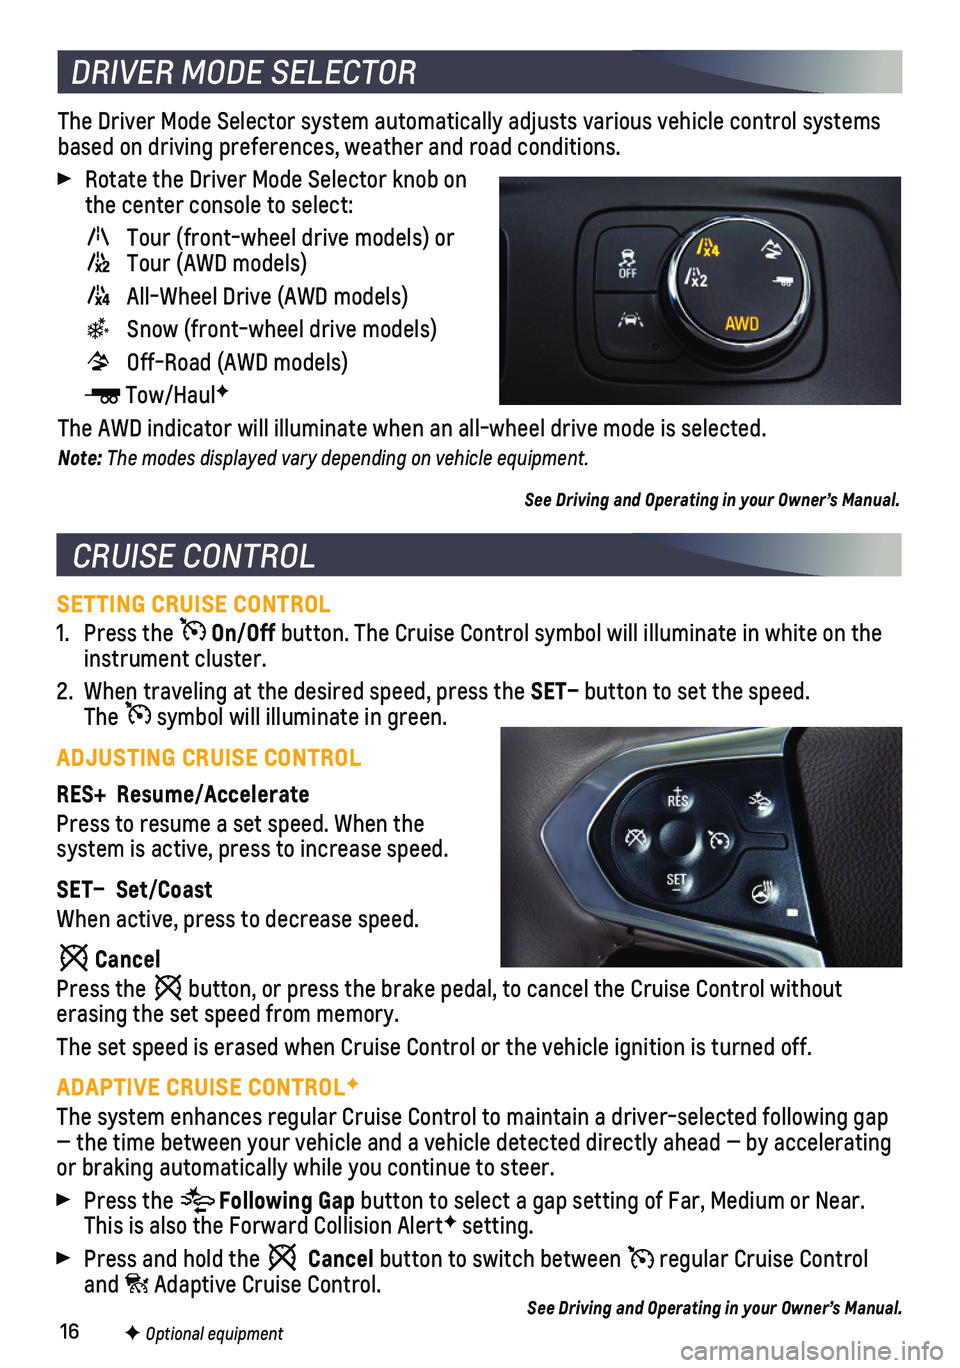 CHEVROLET TRAVERSE 2021  Get To Know Guide 16F Optional equipment
SETTING CRUISE CONTROL
1. Press the  On/Off button. The Cruise Control symbol will illuminate in white on the instrument cluster.
2. When traveling at the desired speed, press t